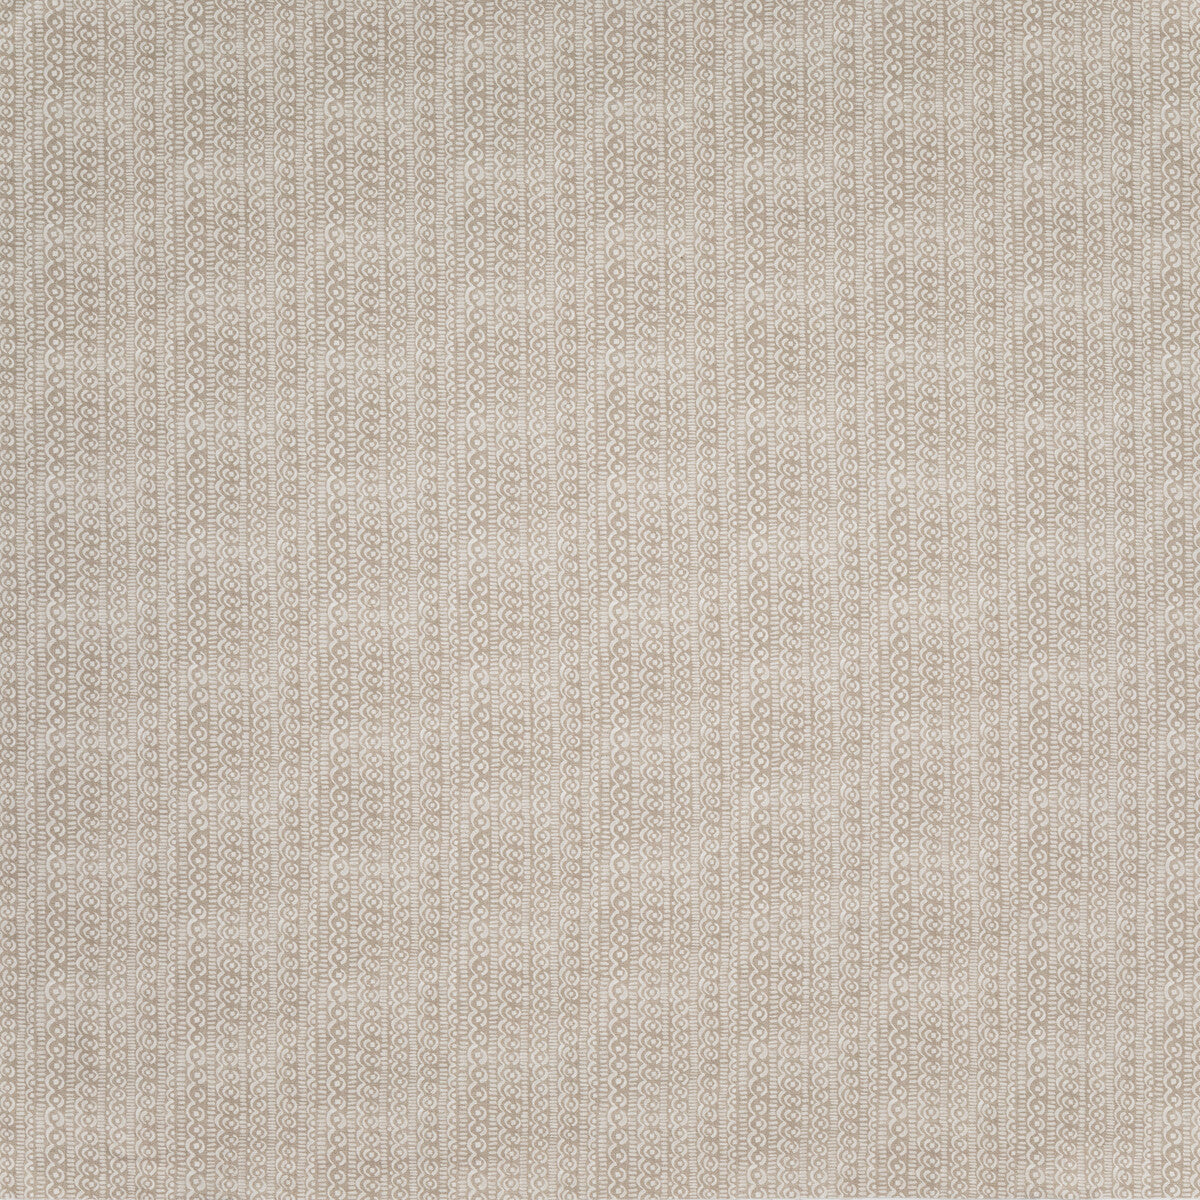 Portland fabric in mouse color - pattern BFC-3707.106.0 - by Lee Jofa in the Blithfield Eden collection